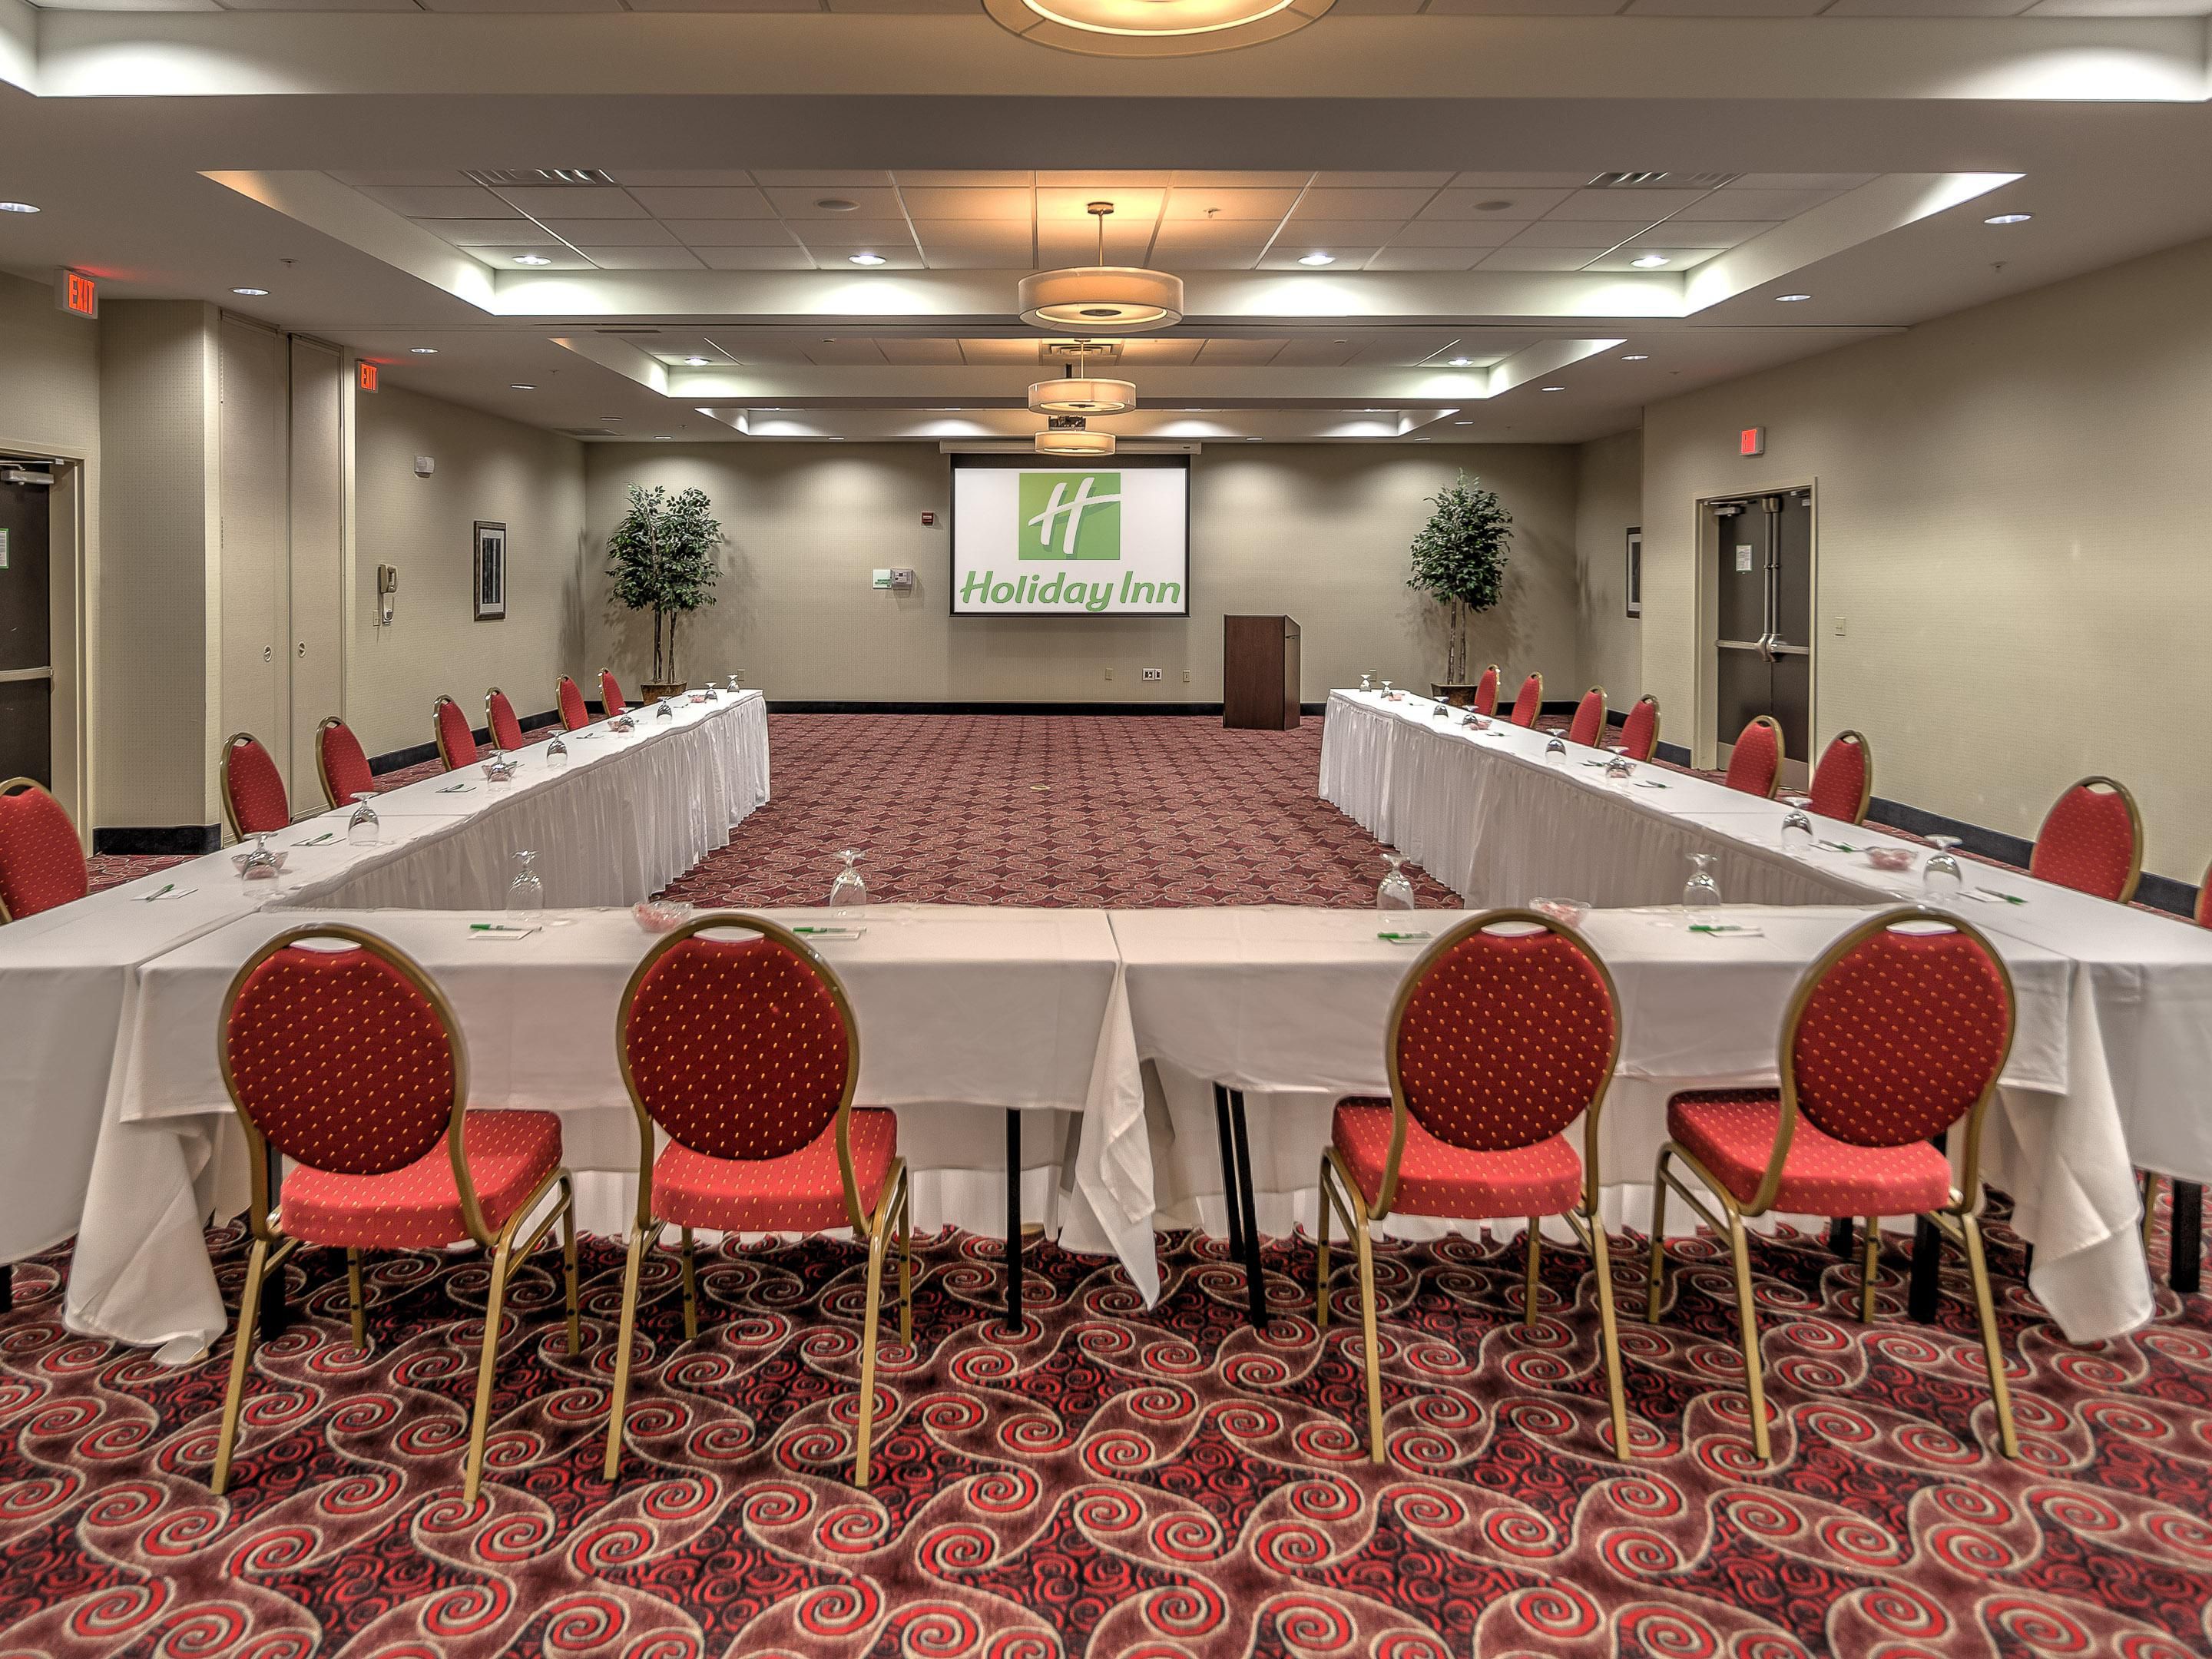 Stay rested and productive during your OKC business trip with comfortable accommodations and convenient amenities at our hotel. We offer on-site breakfast, fitness facilities, and a 24-hour business center with print, copy, and fax services. You can also host private meetings when you reserve our flexible venue with 2,100 sq. ft. of event space.